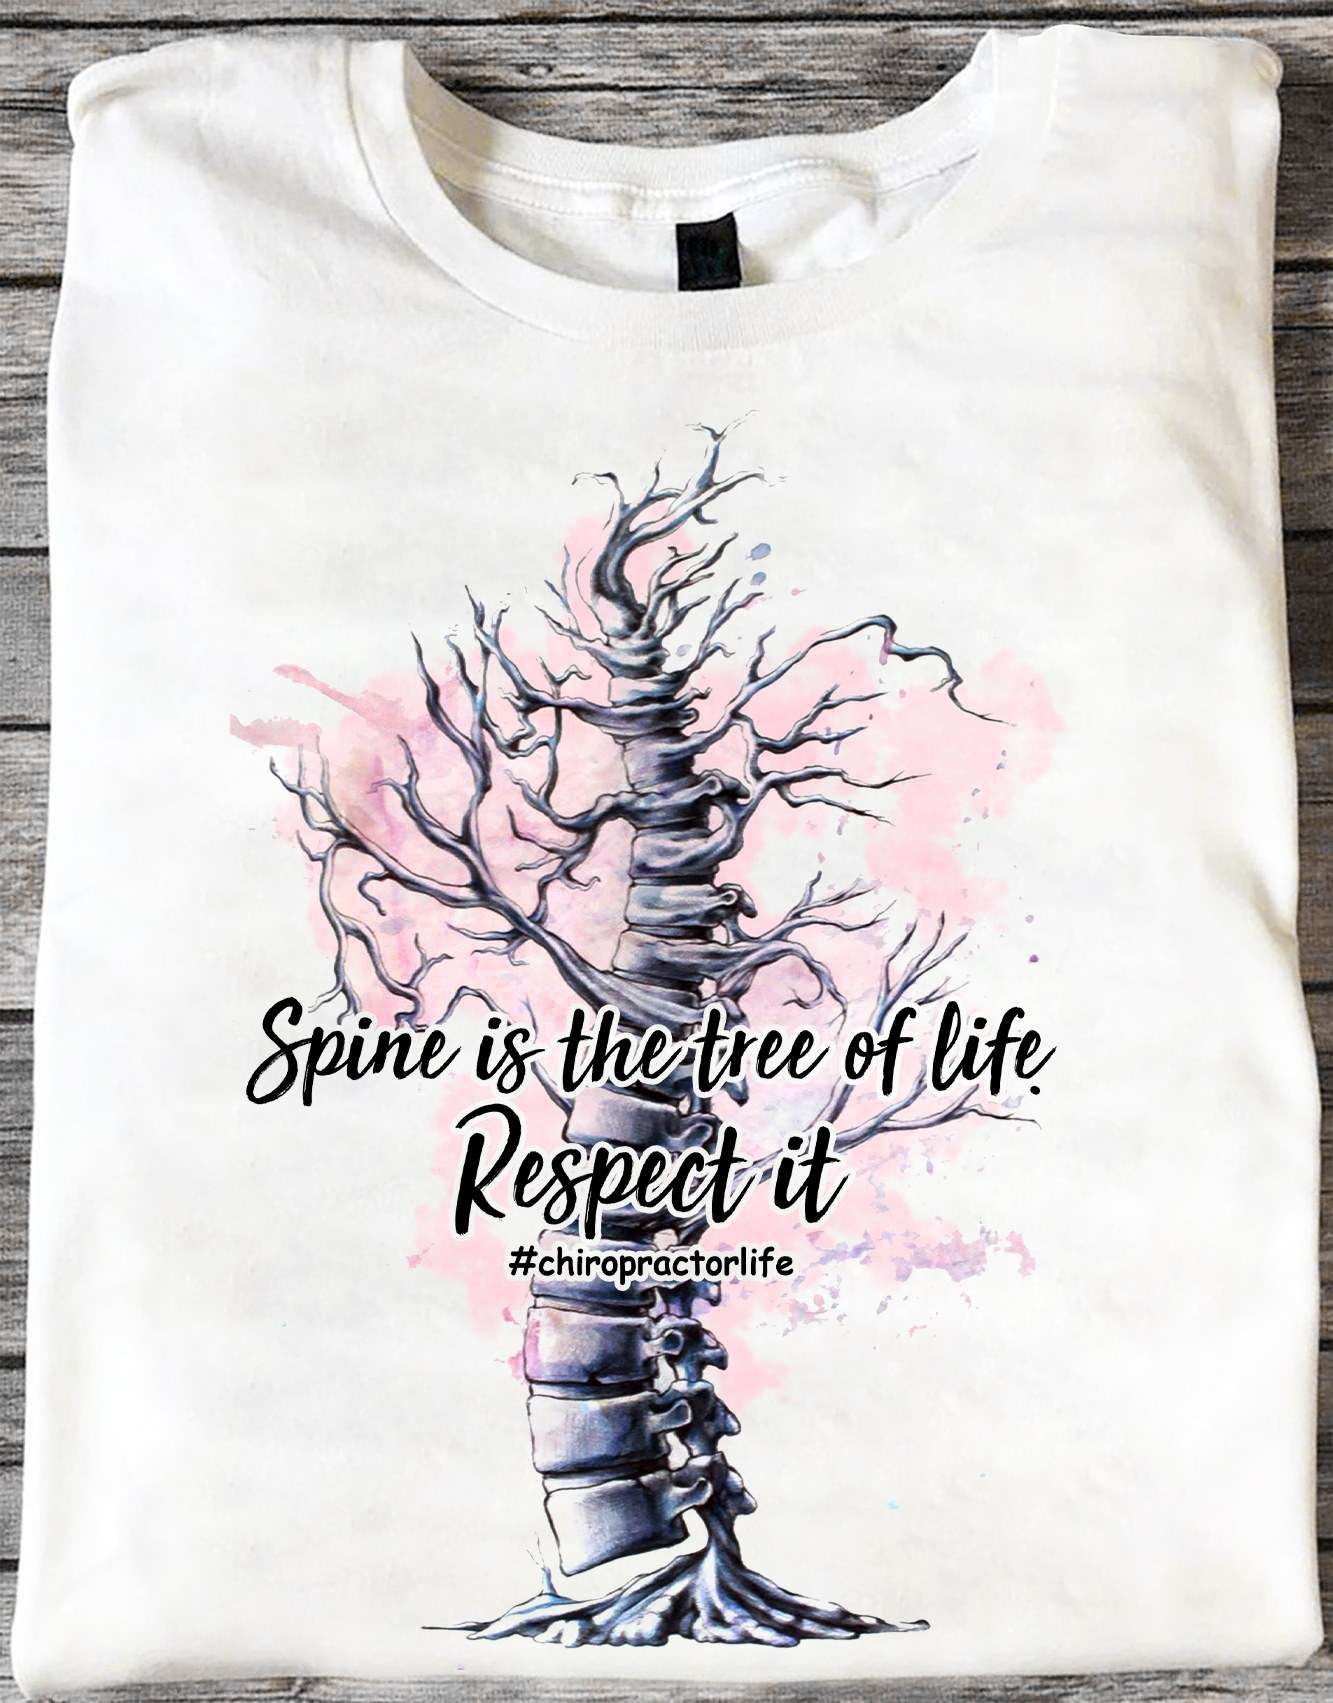 Spine is the tree of life, respect it - Chiropractor life, spine chiropractor